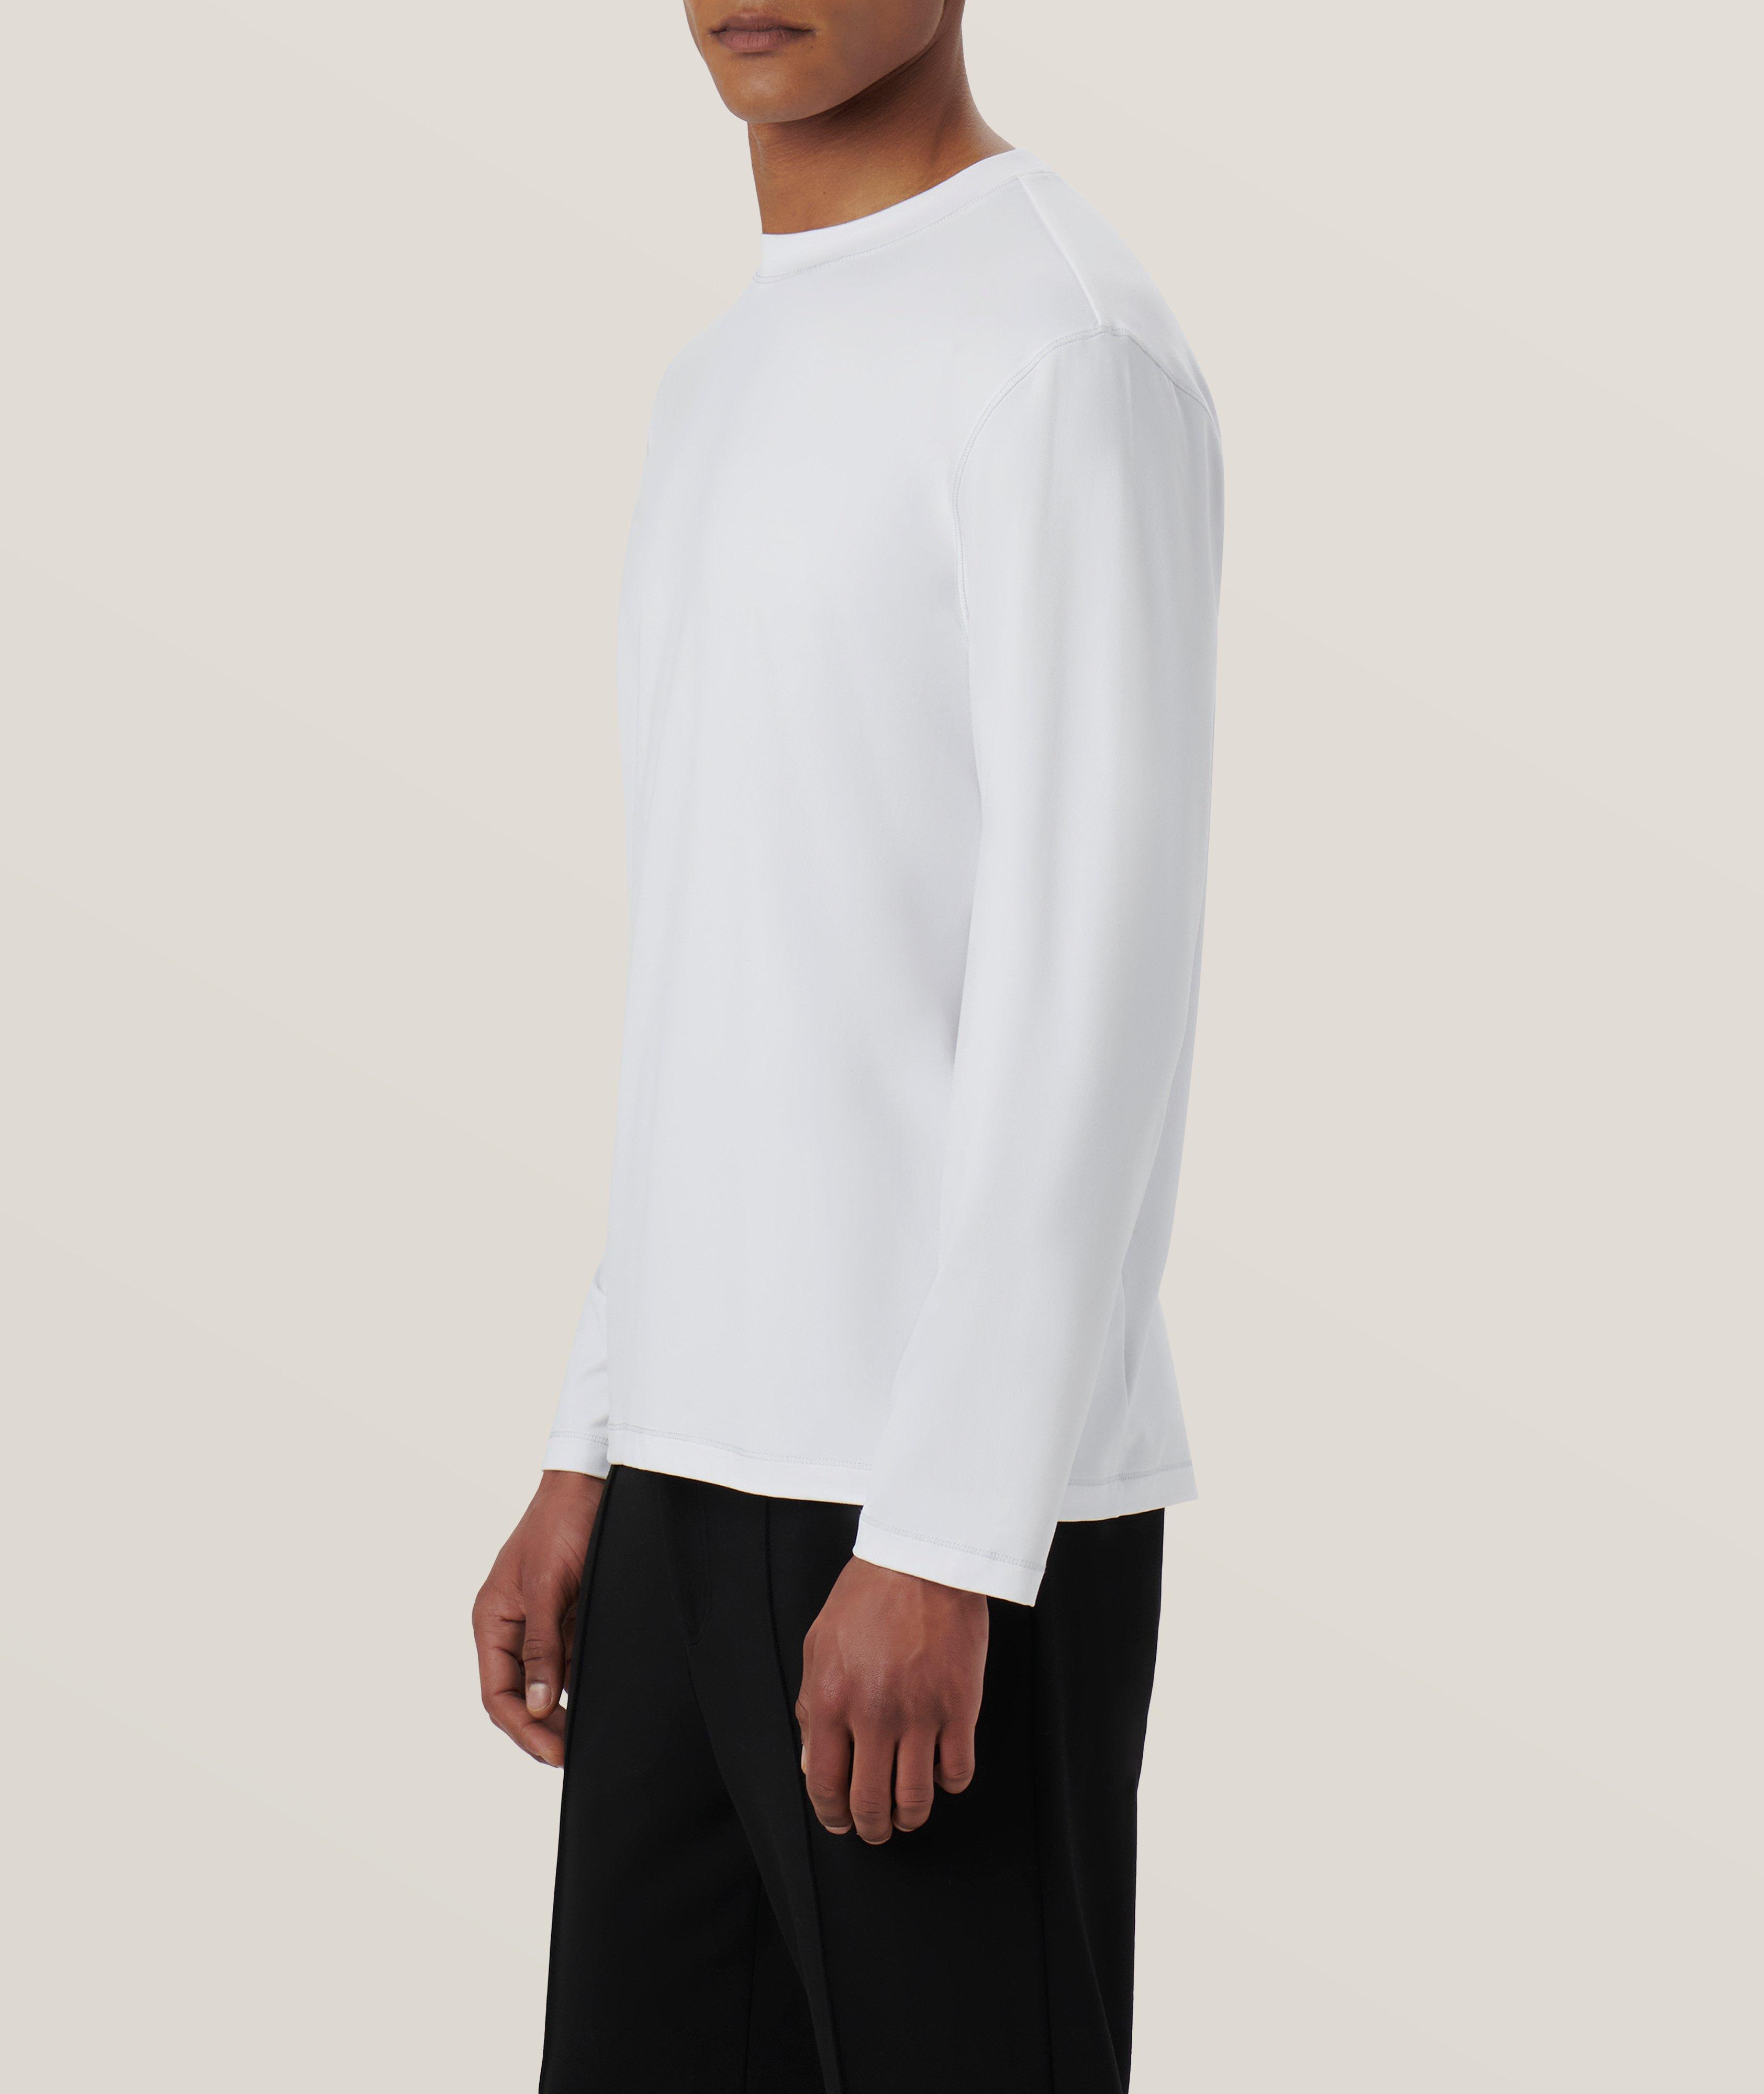 4-Way Stretch UV50 Performance Pullover image 3